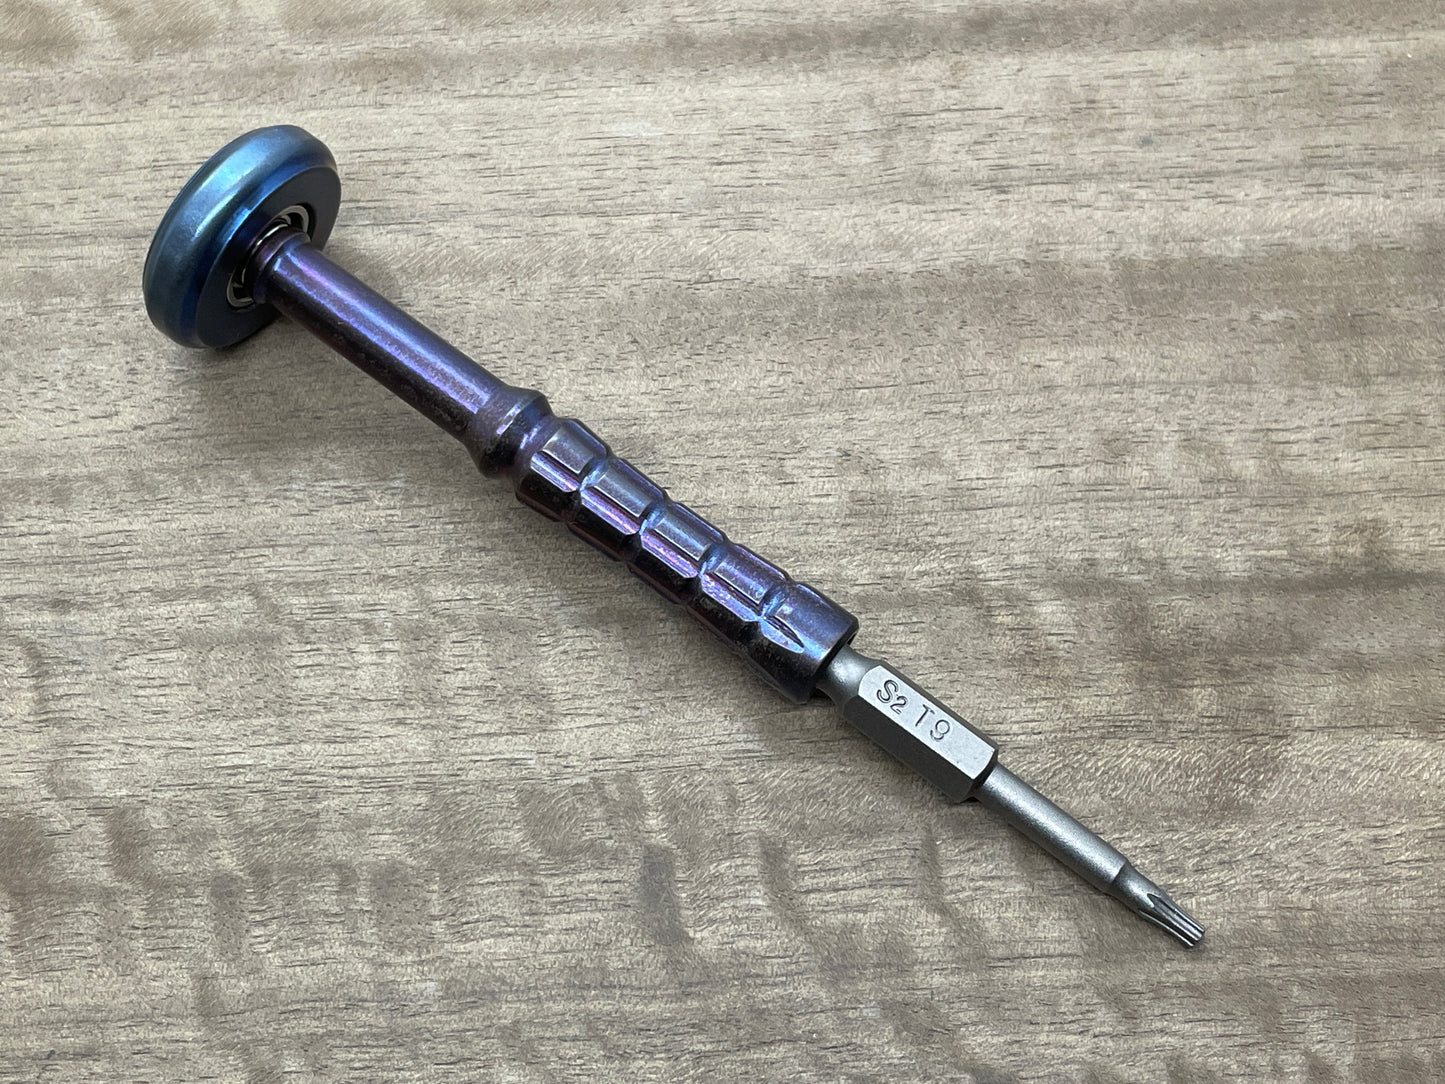 SCREW-BOSS Stainless Steel Tumbled Flamed Screw Driver